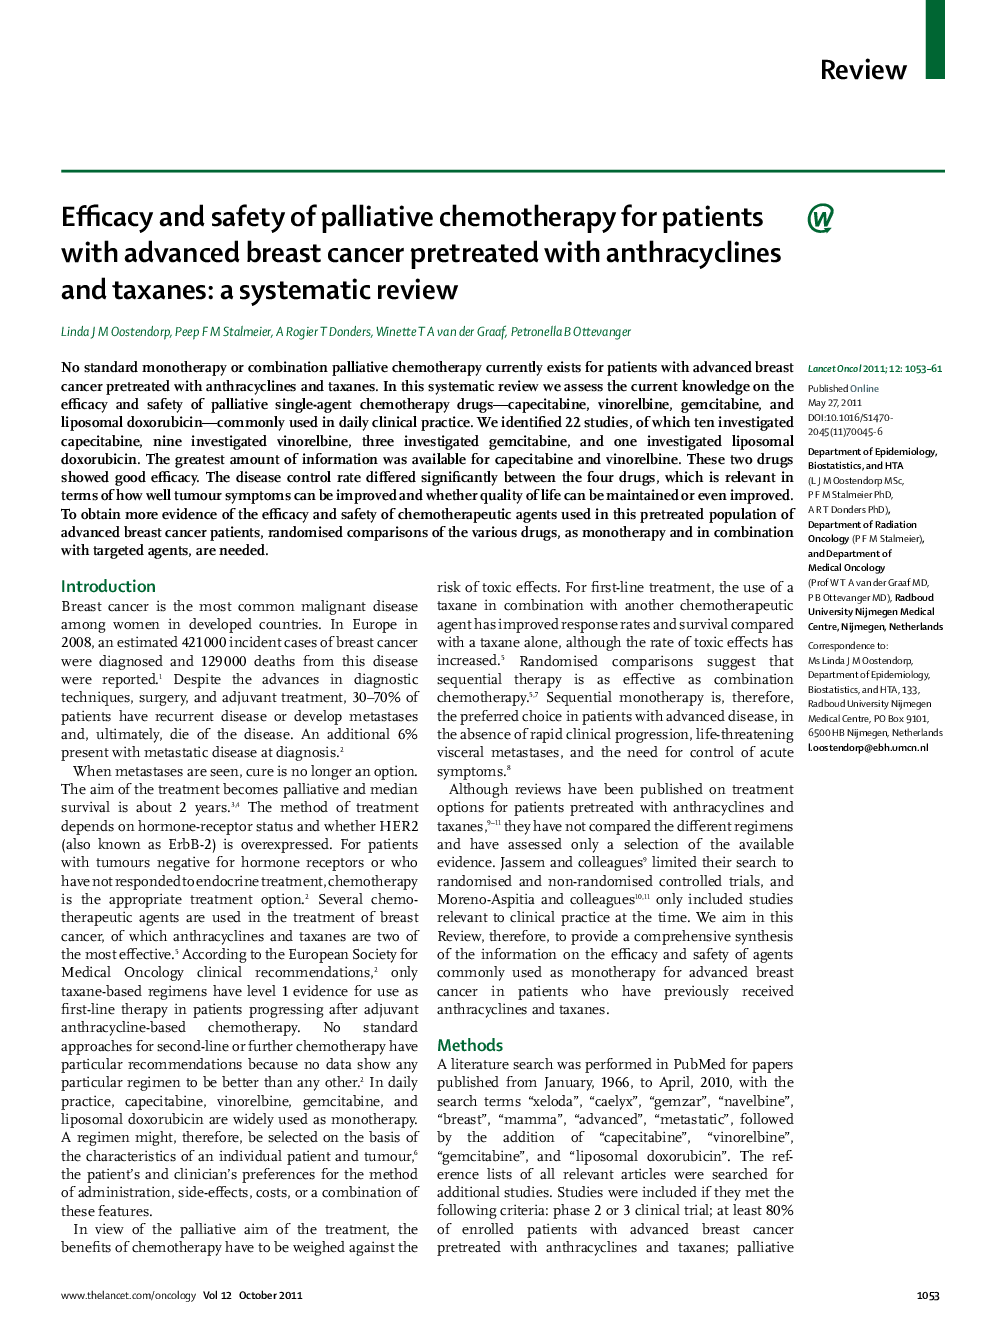 Efficacy and safety of palliative chemotherapy for patients with advanced breast cancer pretreated with anthracyclines and taxanes: a systematic review